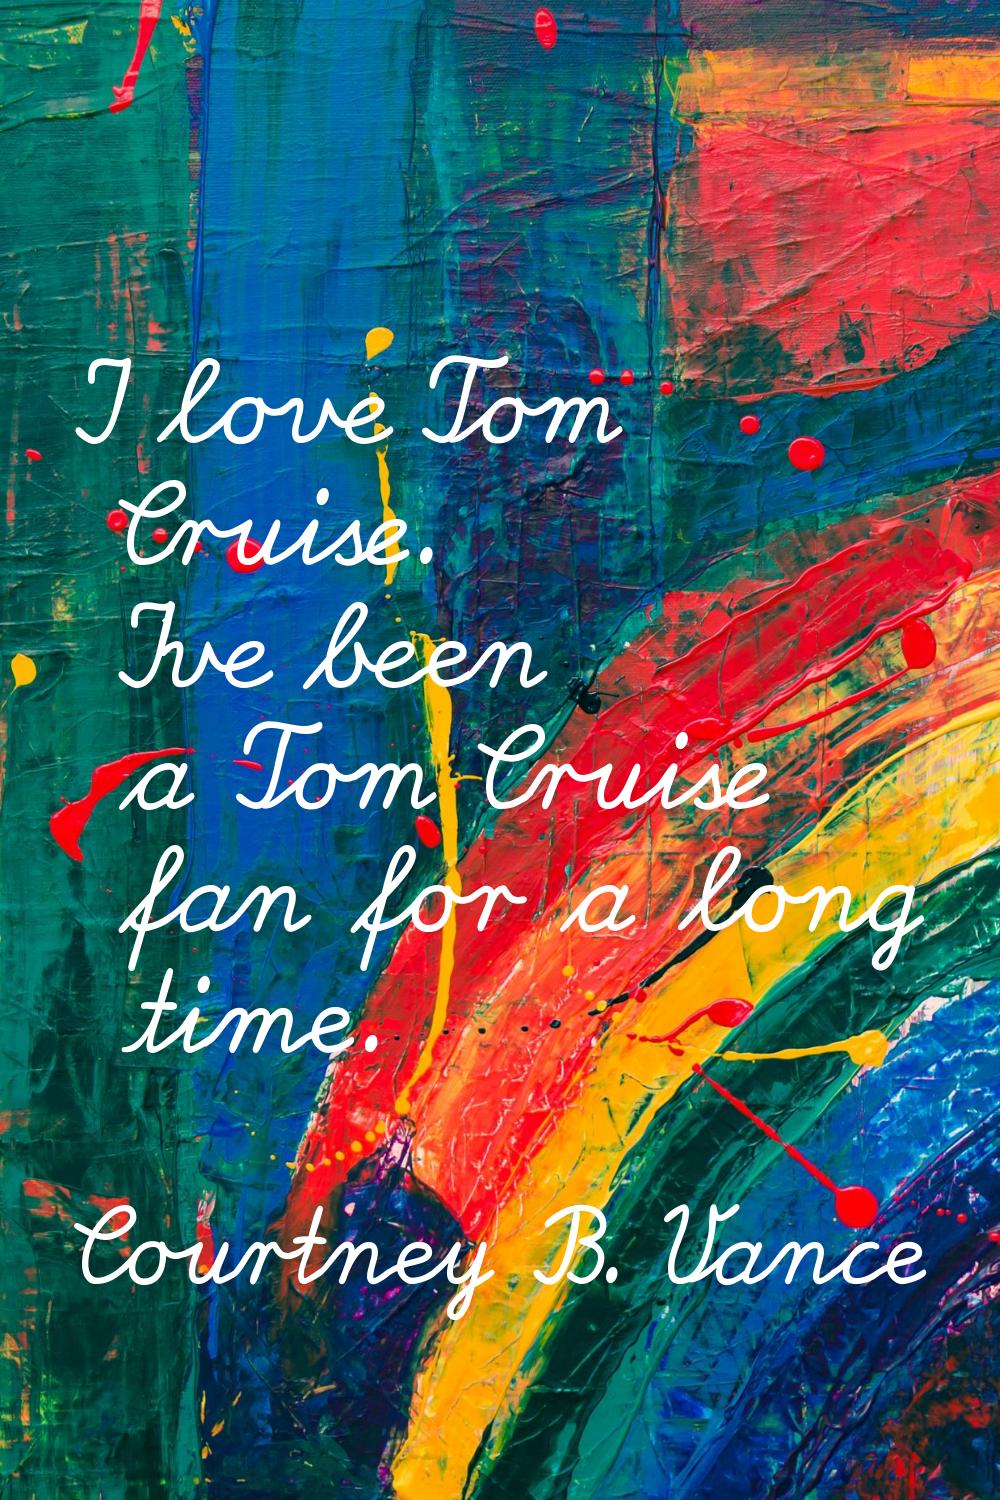 I love Tom Cruise. I've been a Tom Cruise fan for a long time.